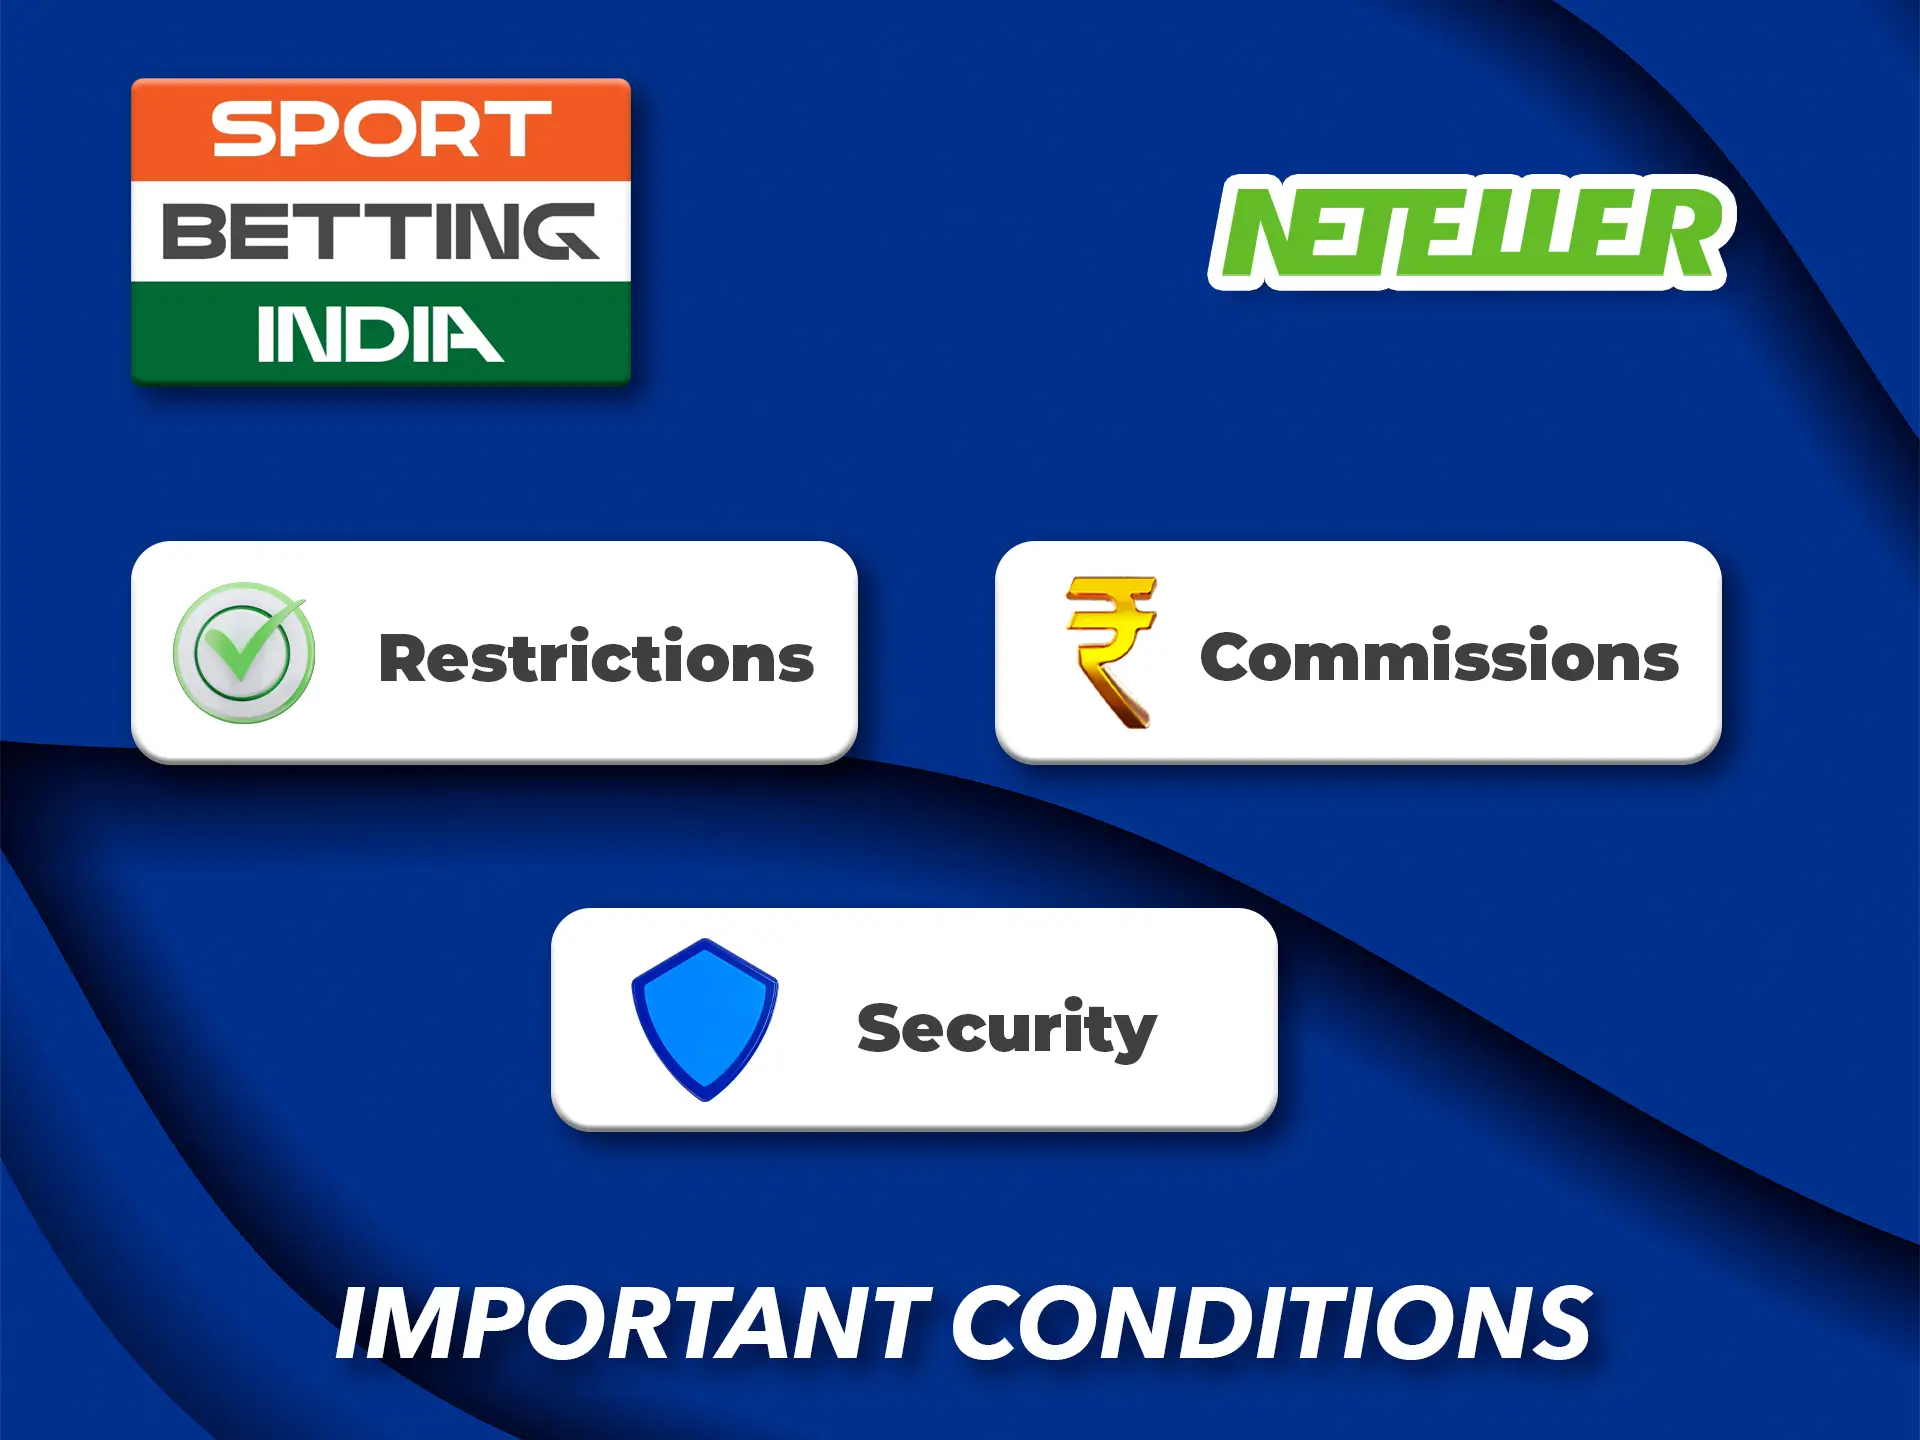 Carefully study all the main factors when choosing a bookmaker for betting with Neteller payment system.